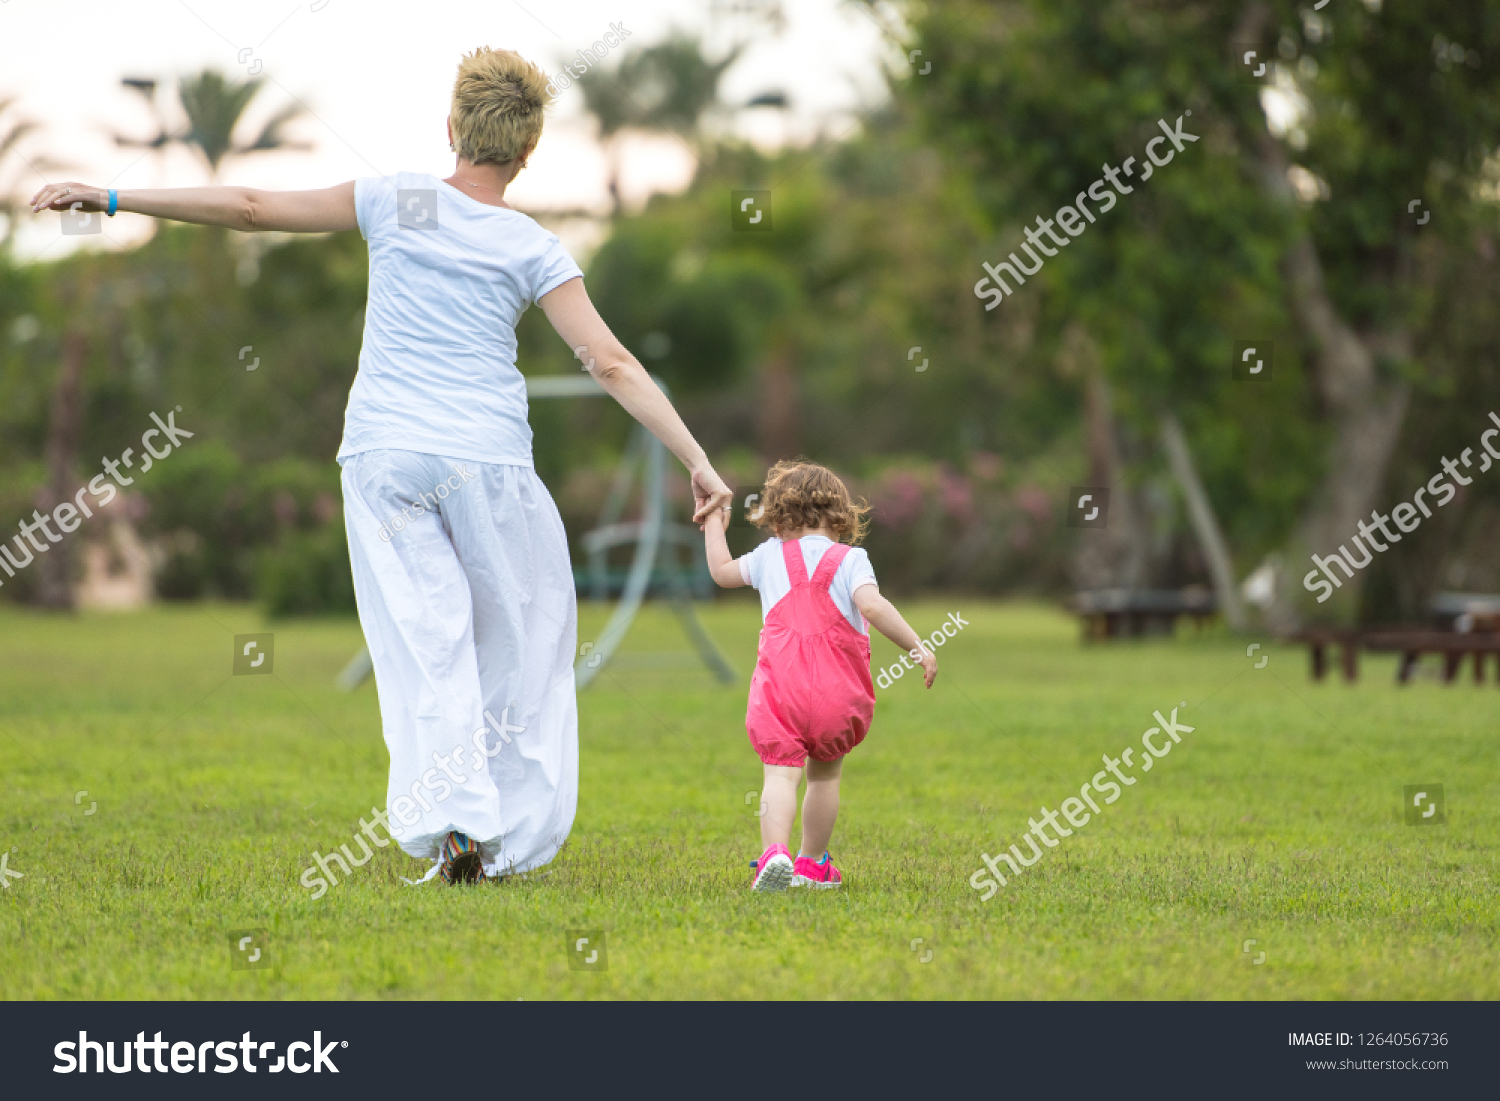 Young Mother and cute little daughter enjoying free time playing outside at backyard on the grass, happy family in nature concept #1264056736